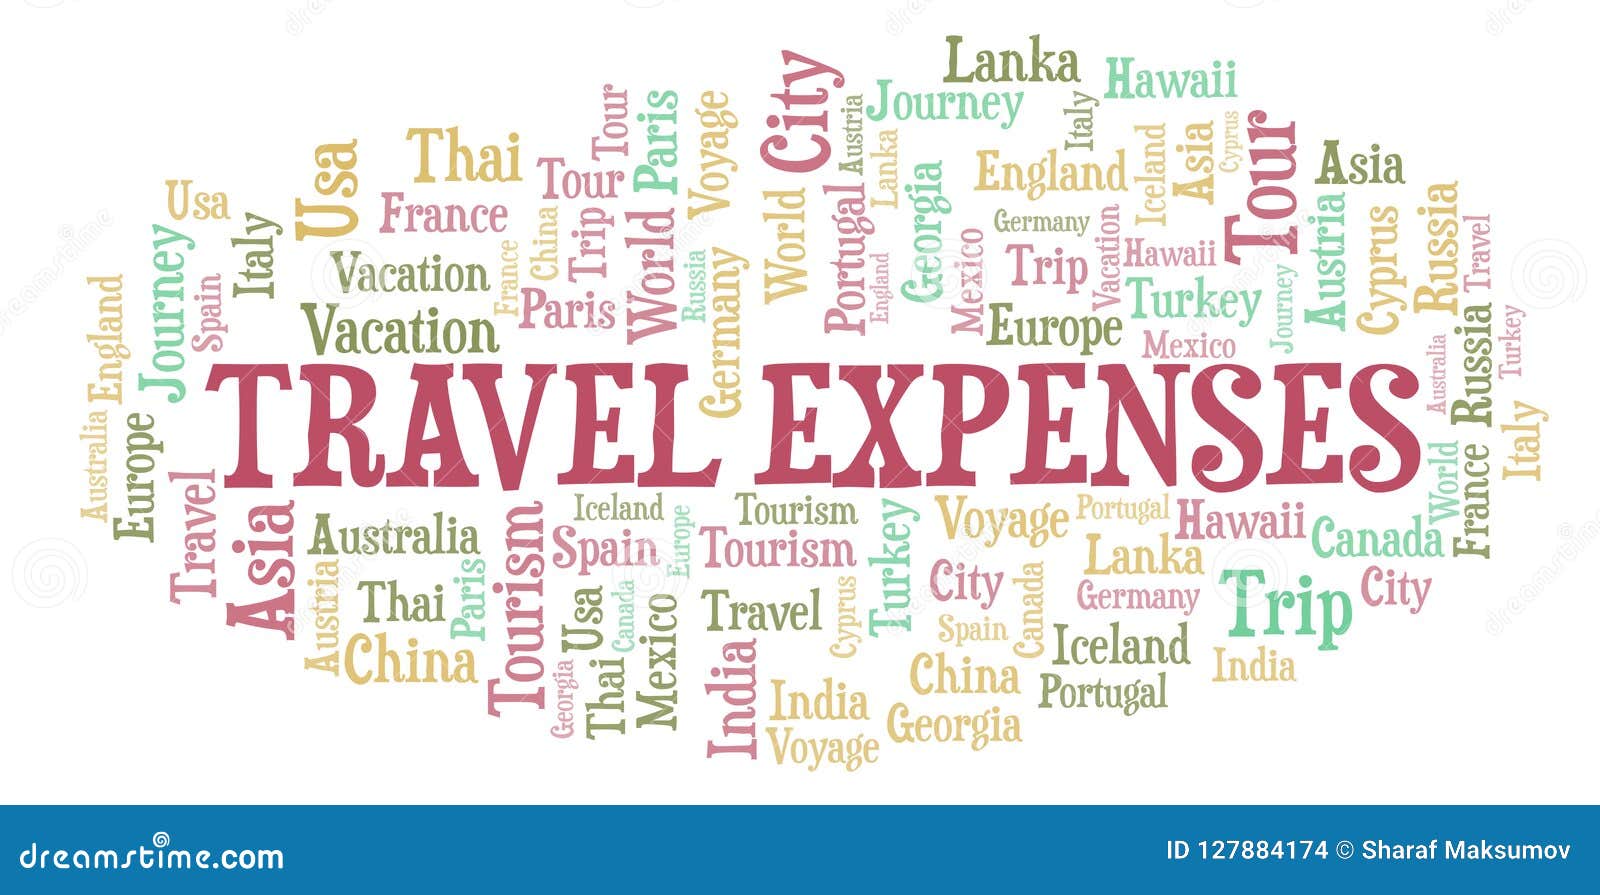 different words for travel expenses